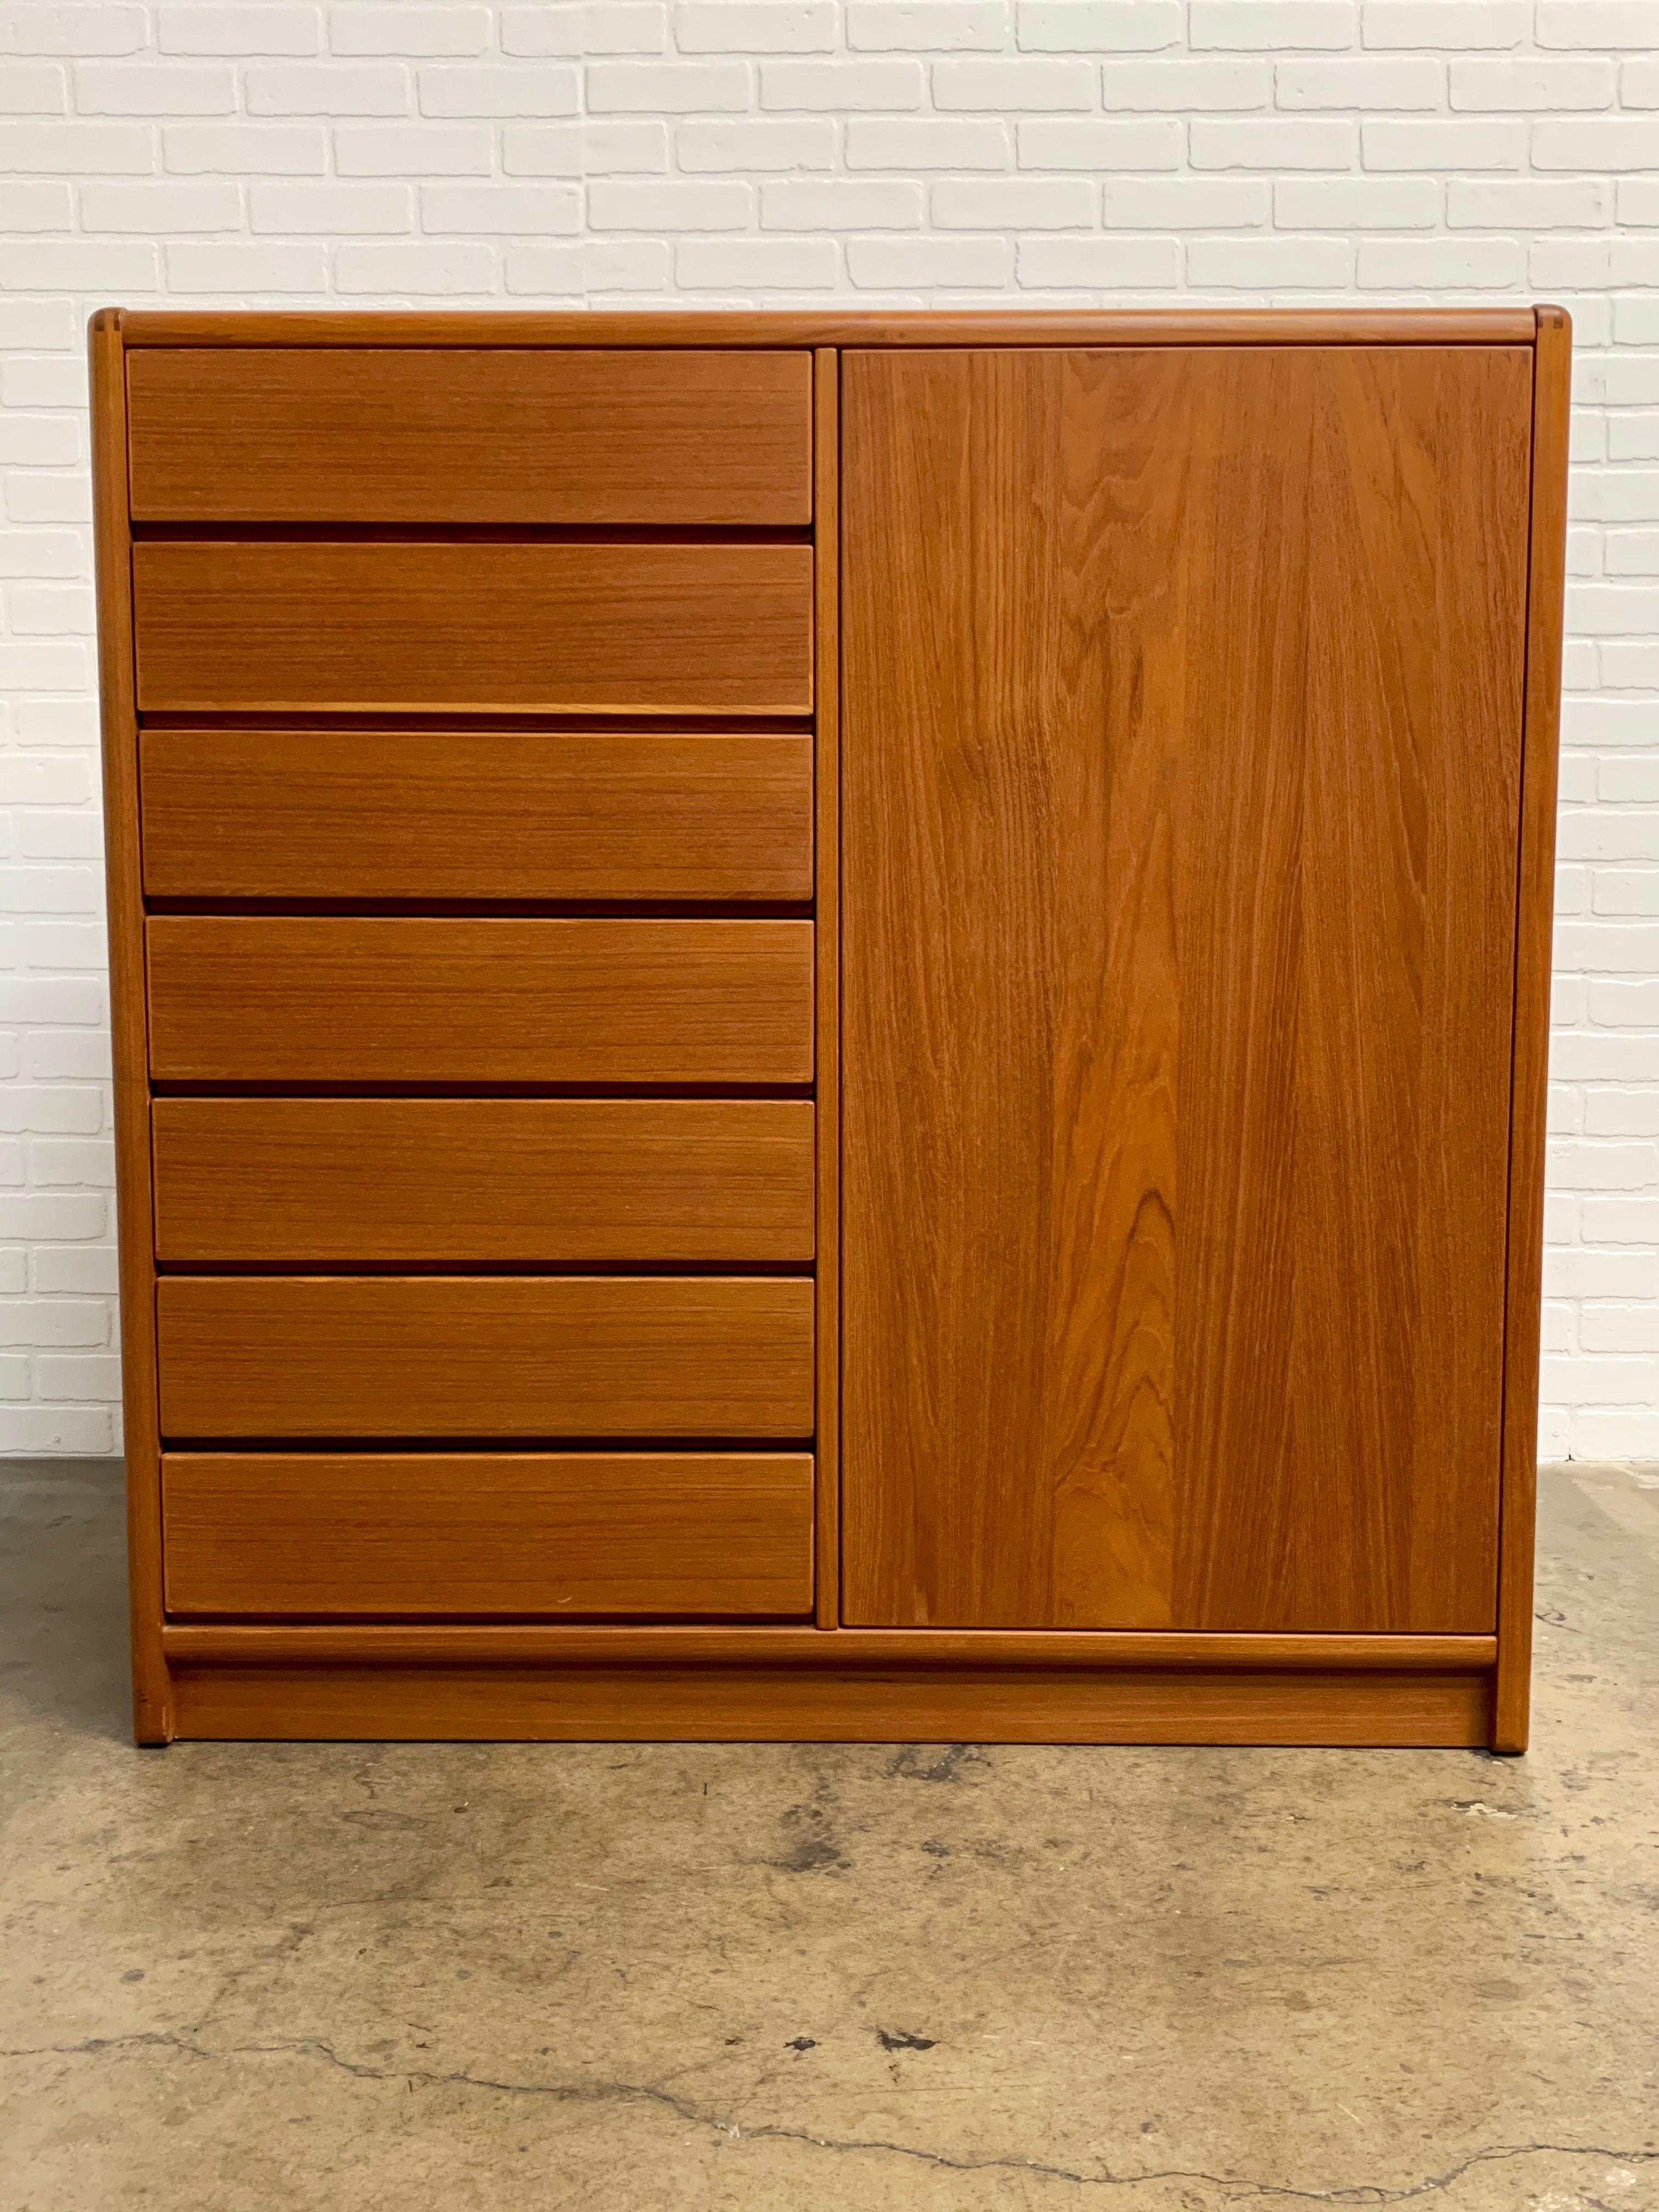 Teak armoire with seven drawers and a right hand door that has two adjustable shelves and one small accessory drawer in the Danish modern highboy style.